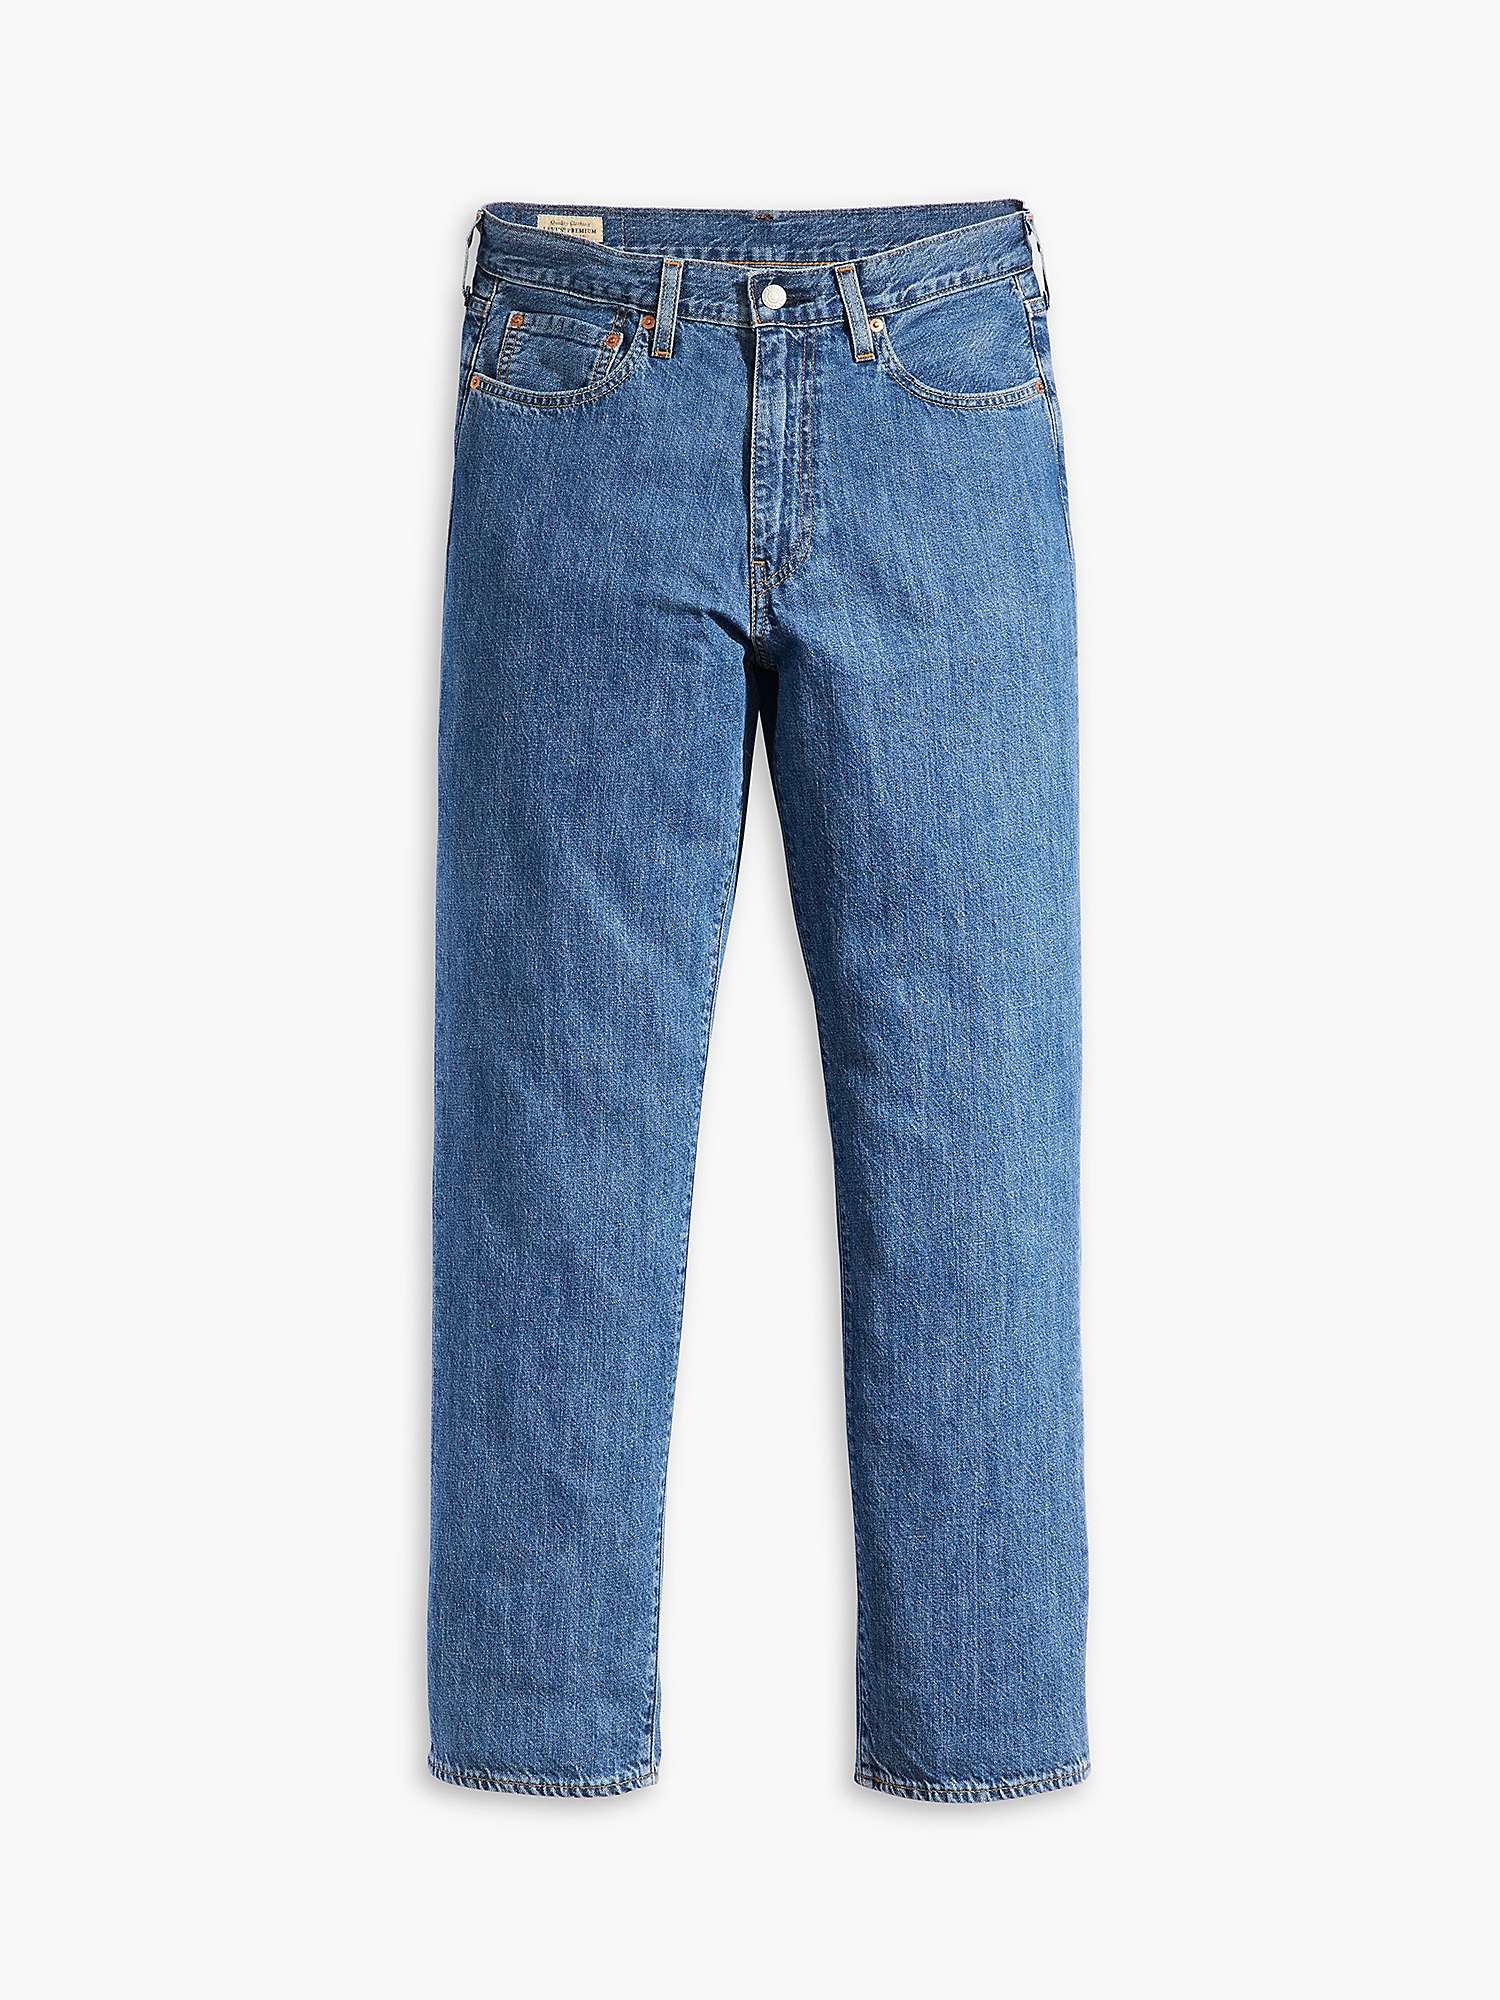 Buy Levi's 568 Stay Loose Jeans, Blue Online at johnlewis.com